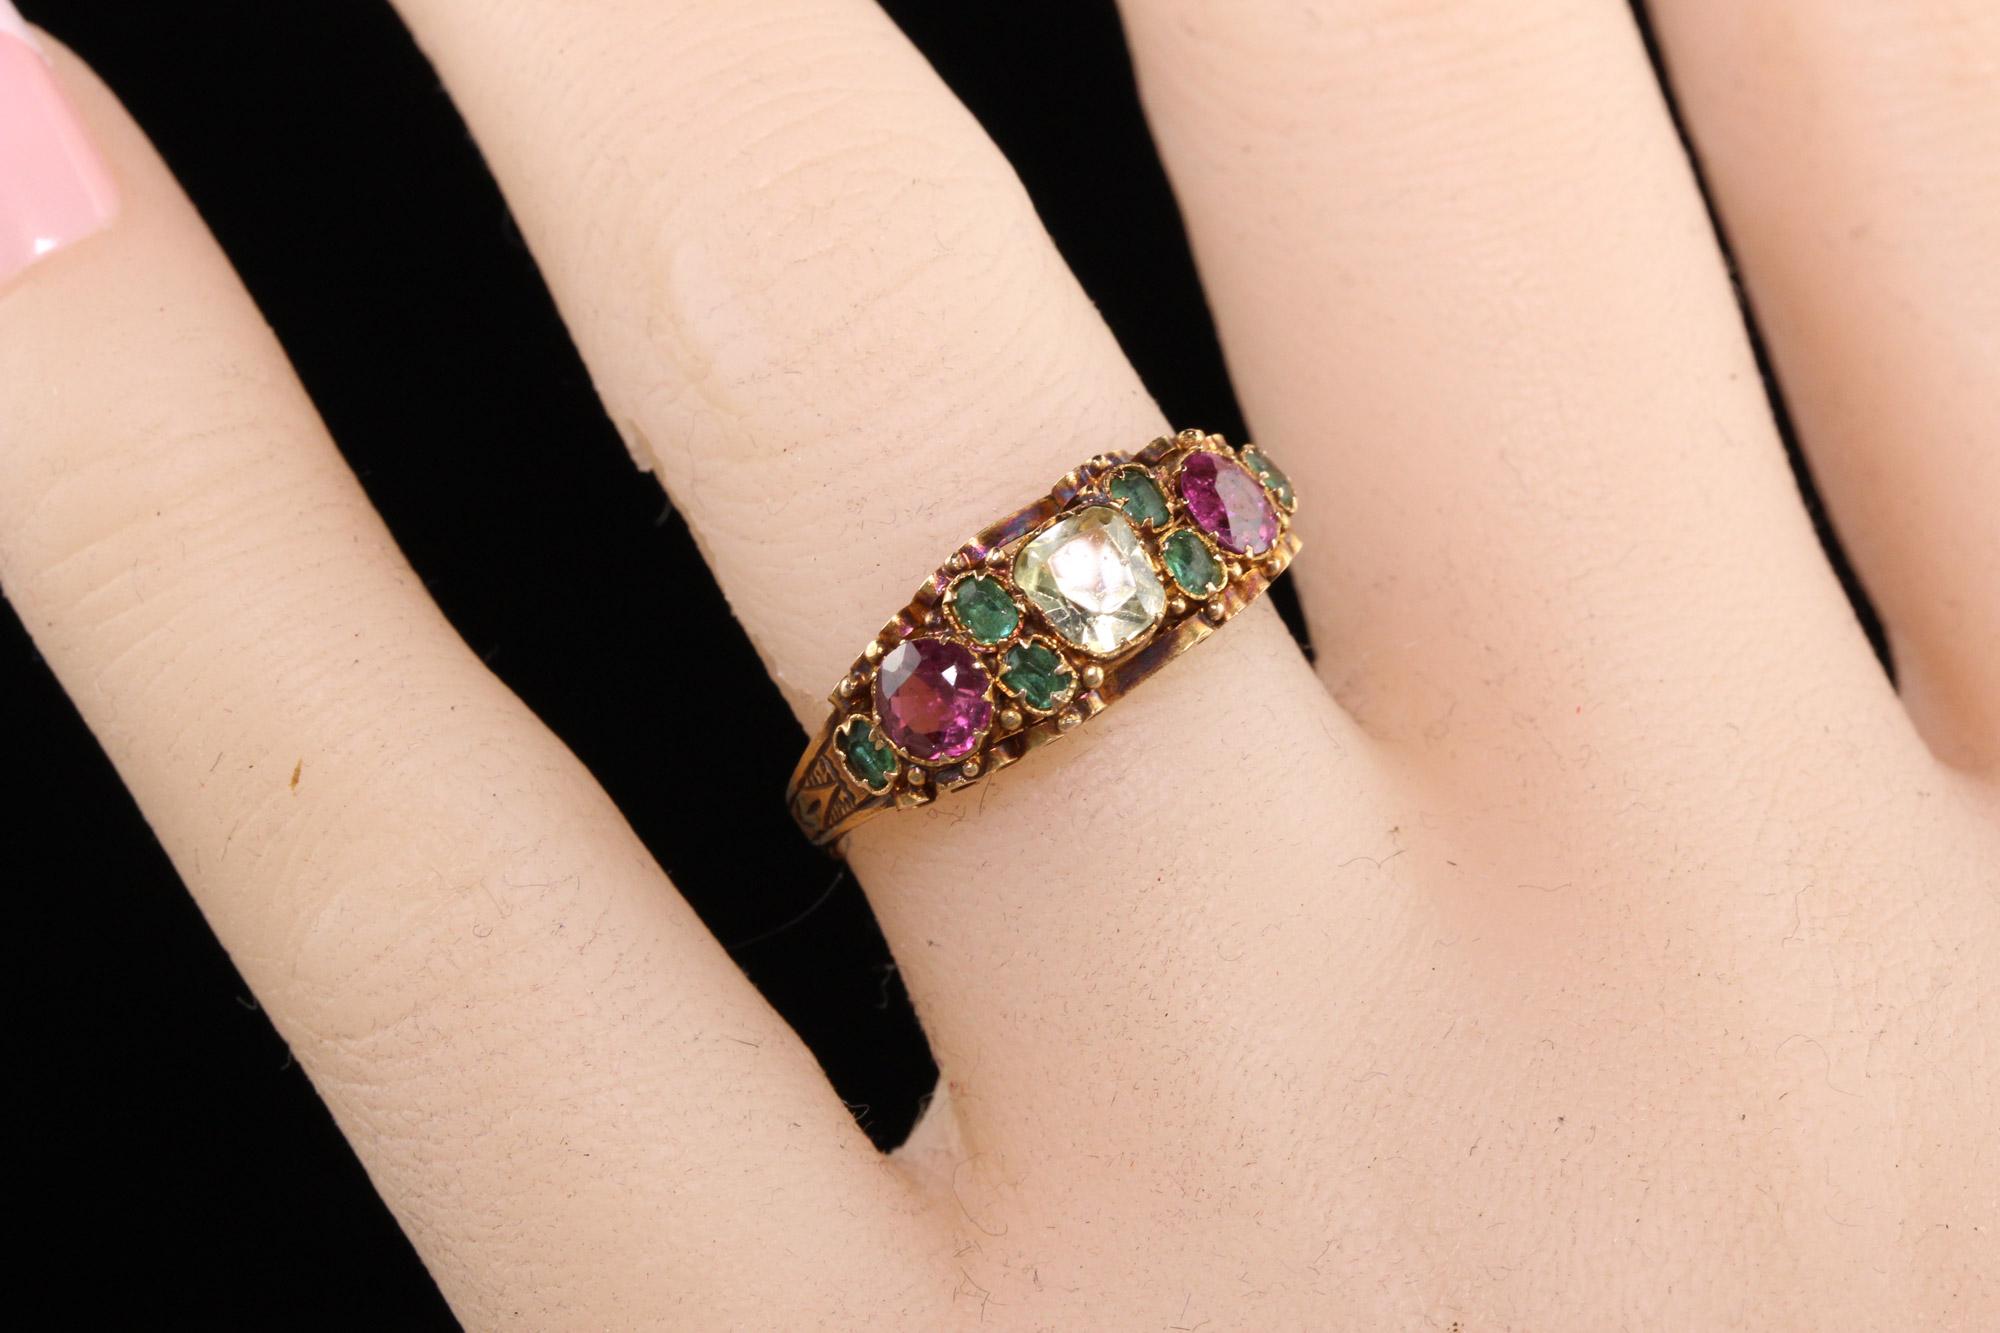 Women's Antique Victorian 15K Yellow Gold Ruby Emerald and Chrysoberyl Engraved Ring